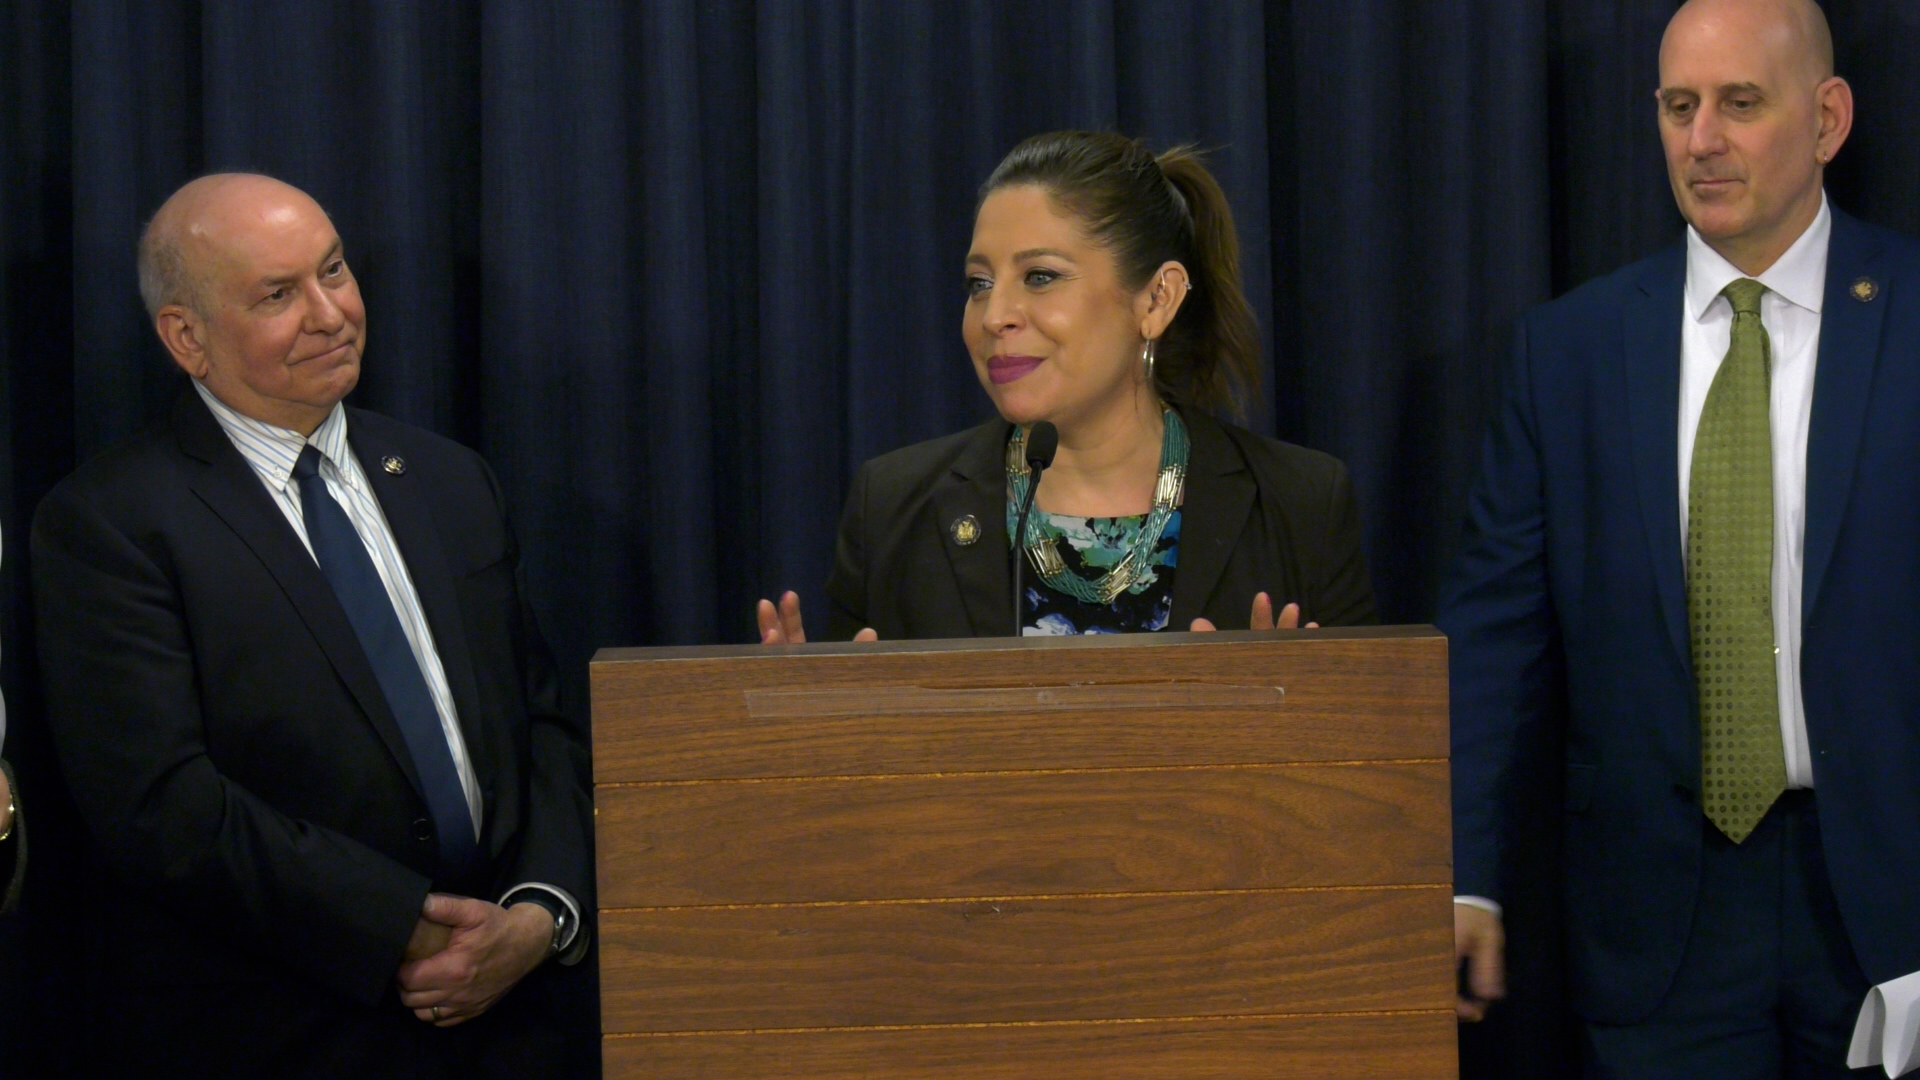 Gonzalez-Rojas Calls for the Inclusion of the Reproductive Health Training Fund in Final NY Budget